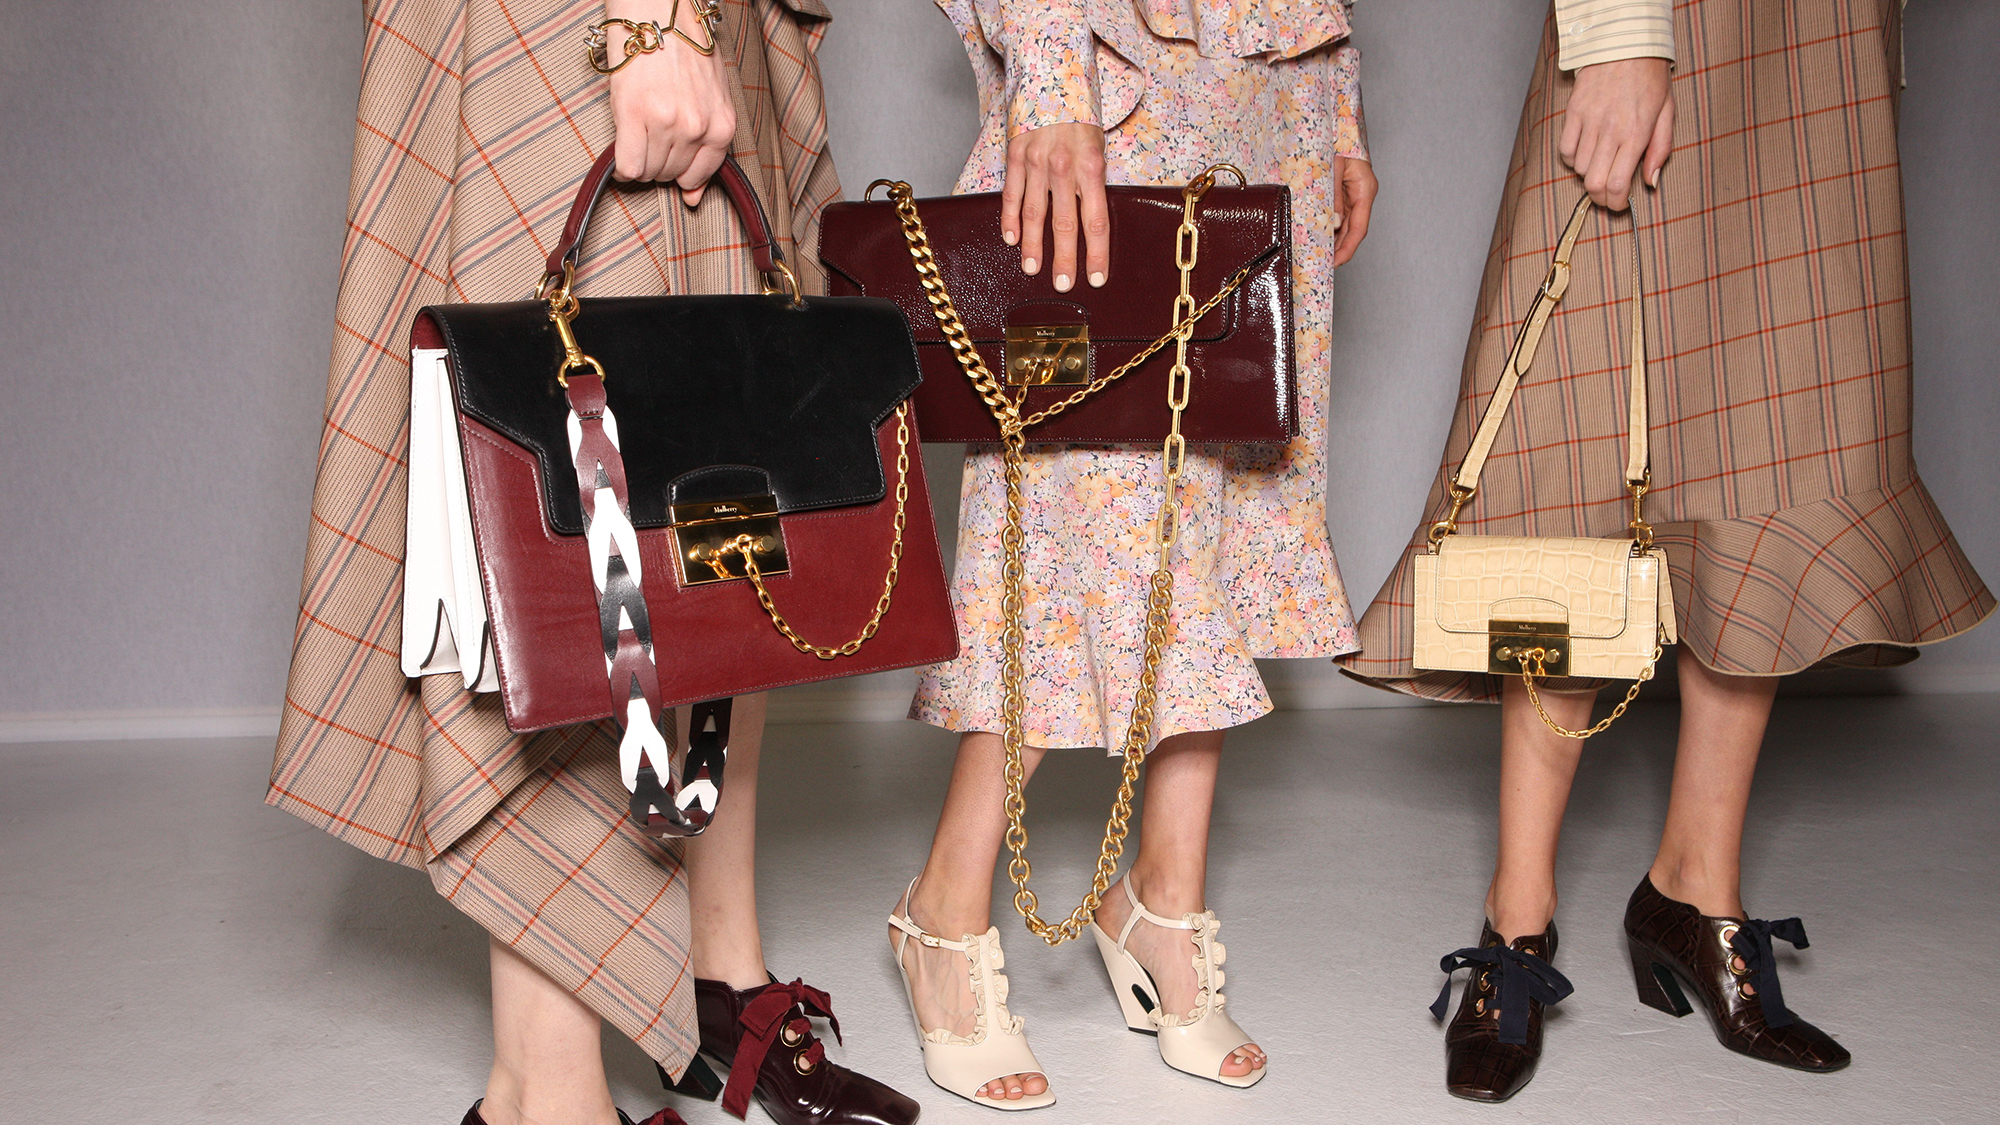 5 Things You Didn't Know About Mulberry Handbags